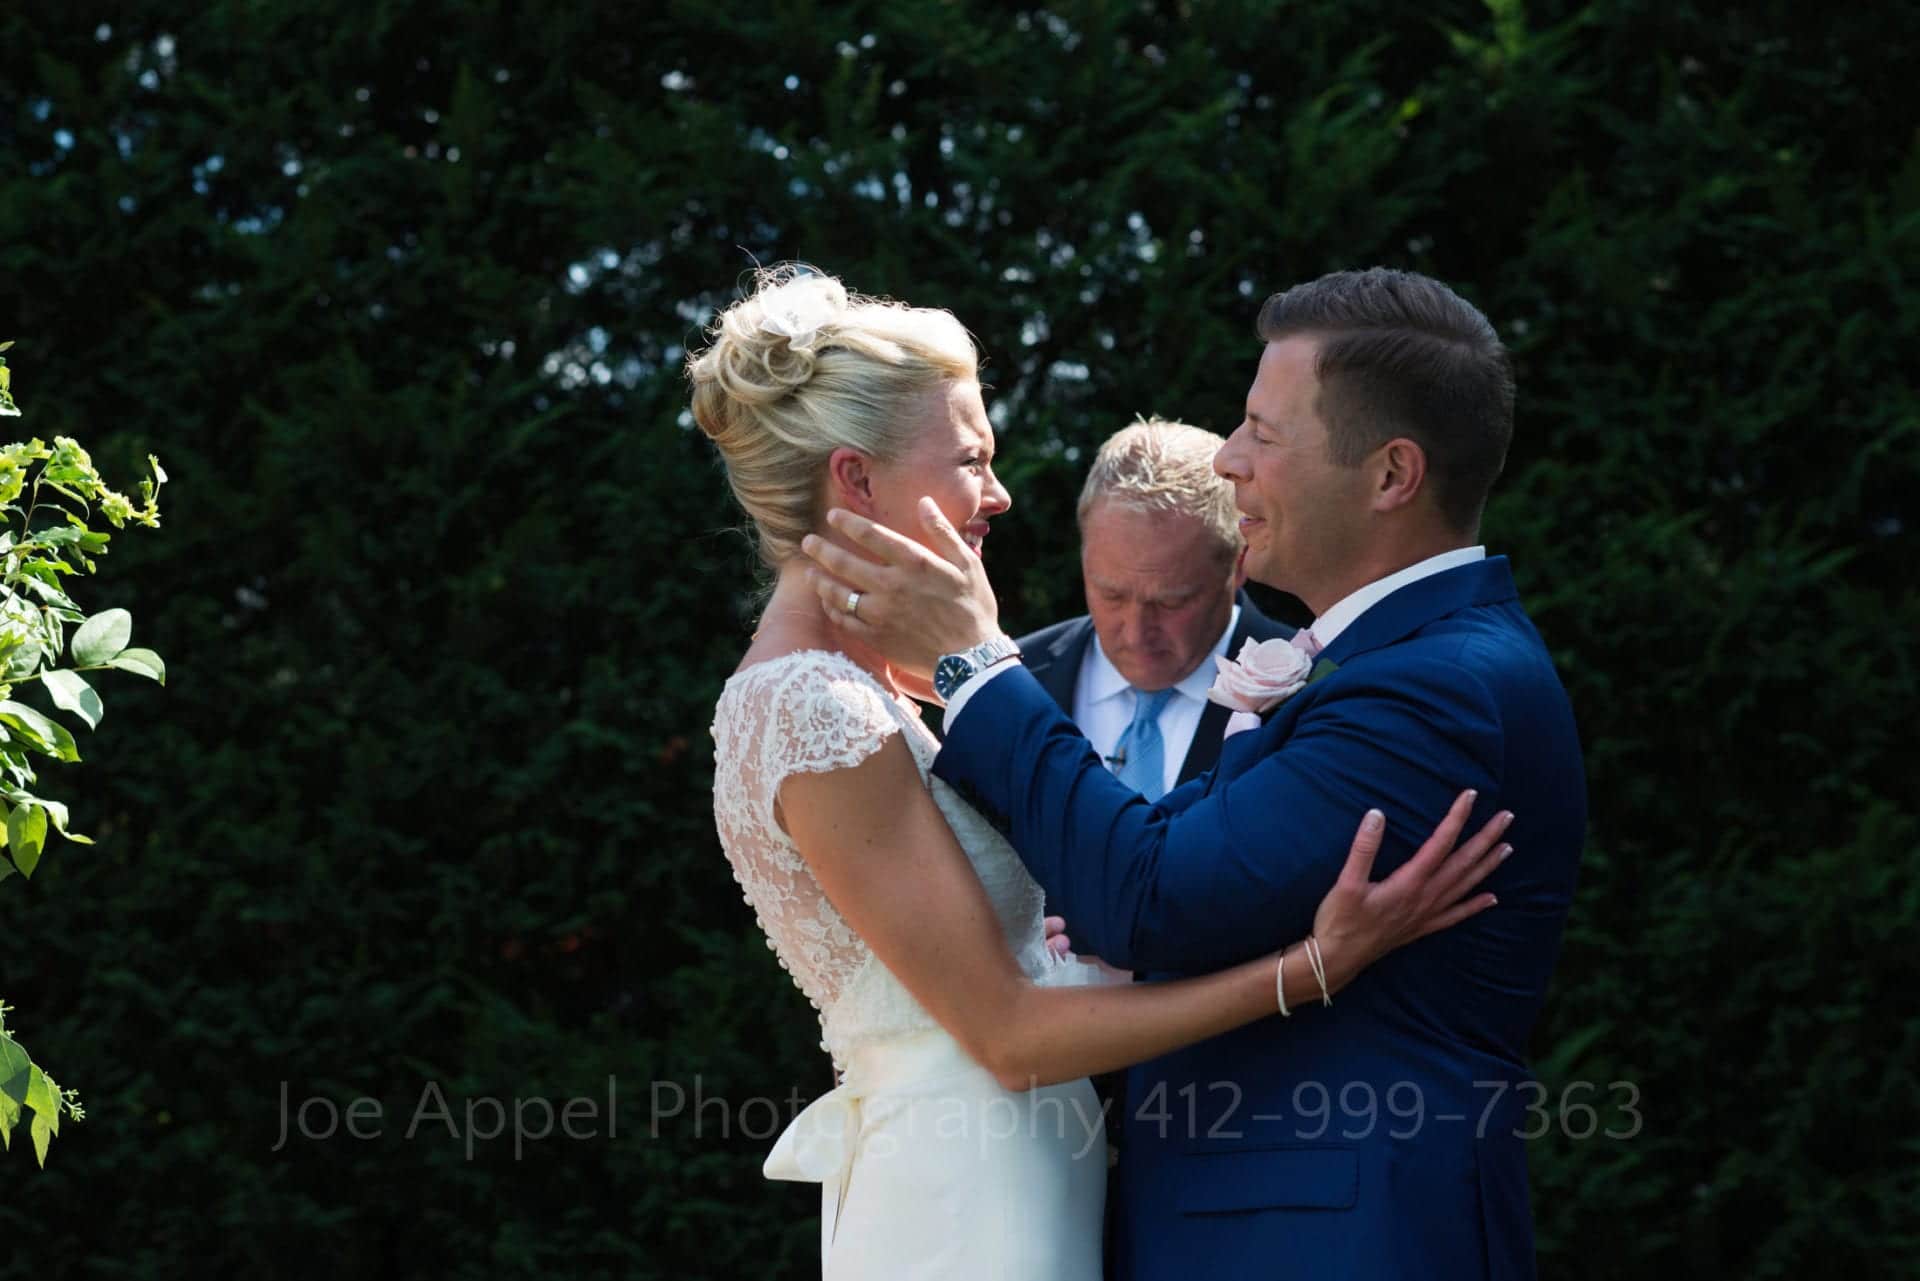 A groom holds his bride's face as they prepare to kiss near the end of their wedding ceremony during their Omni Bedford Springs Resort Wedding.